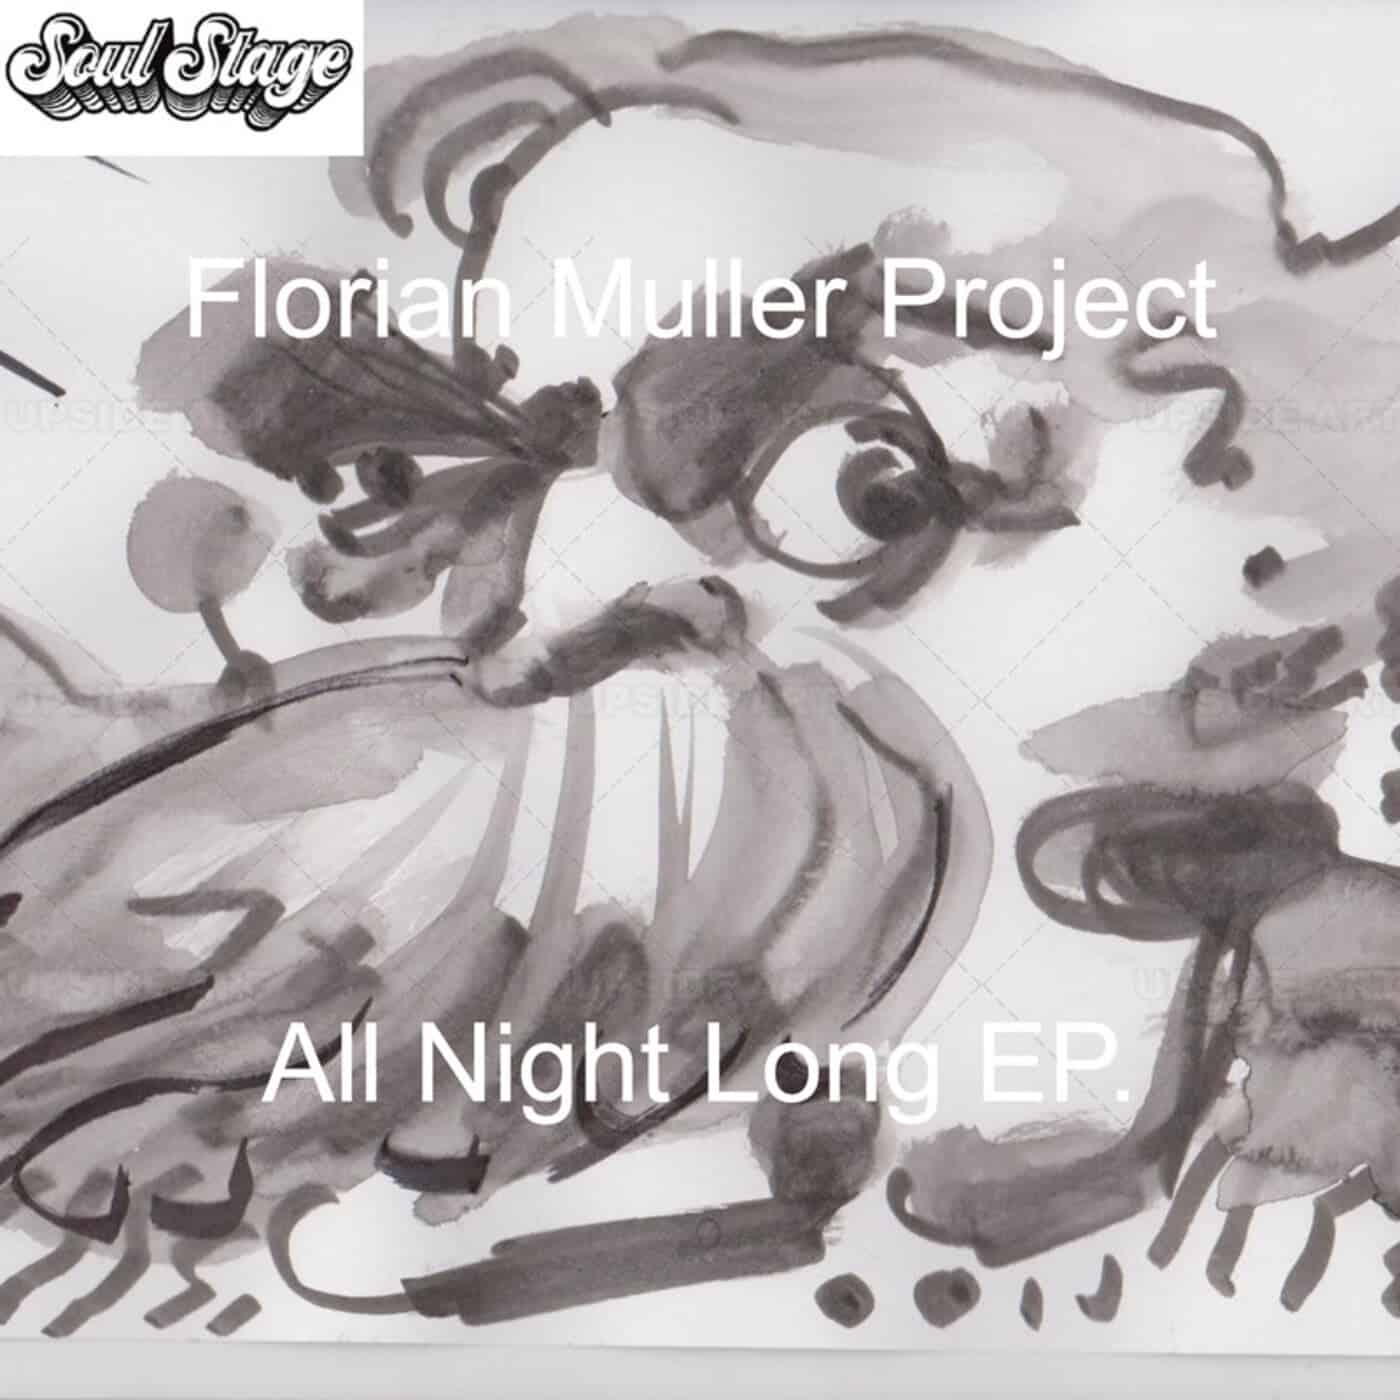 Download Florian Muller Project - All Night Long on Electrobuzz